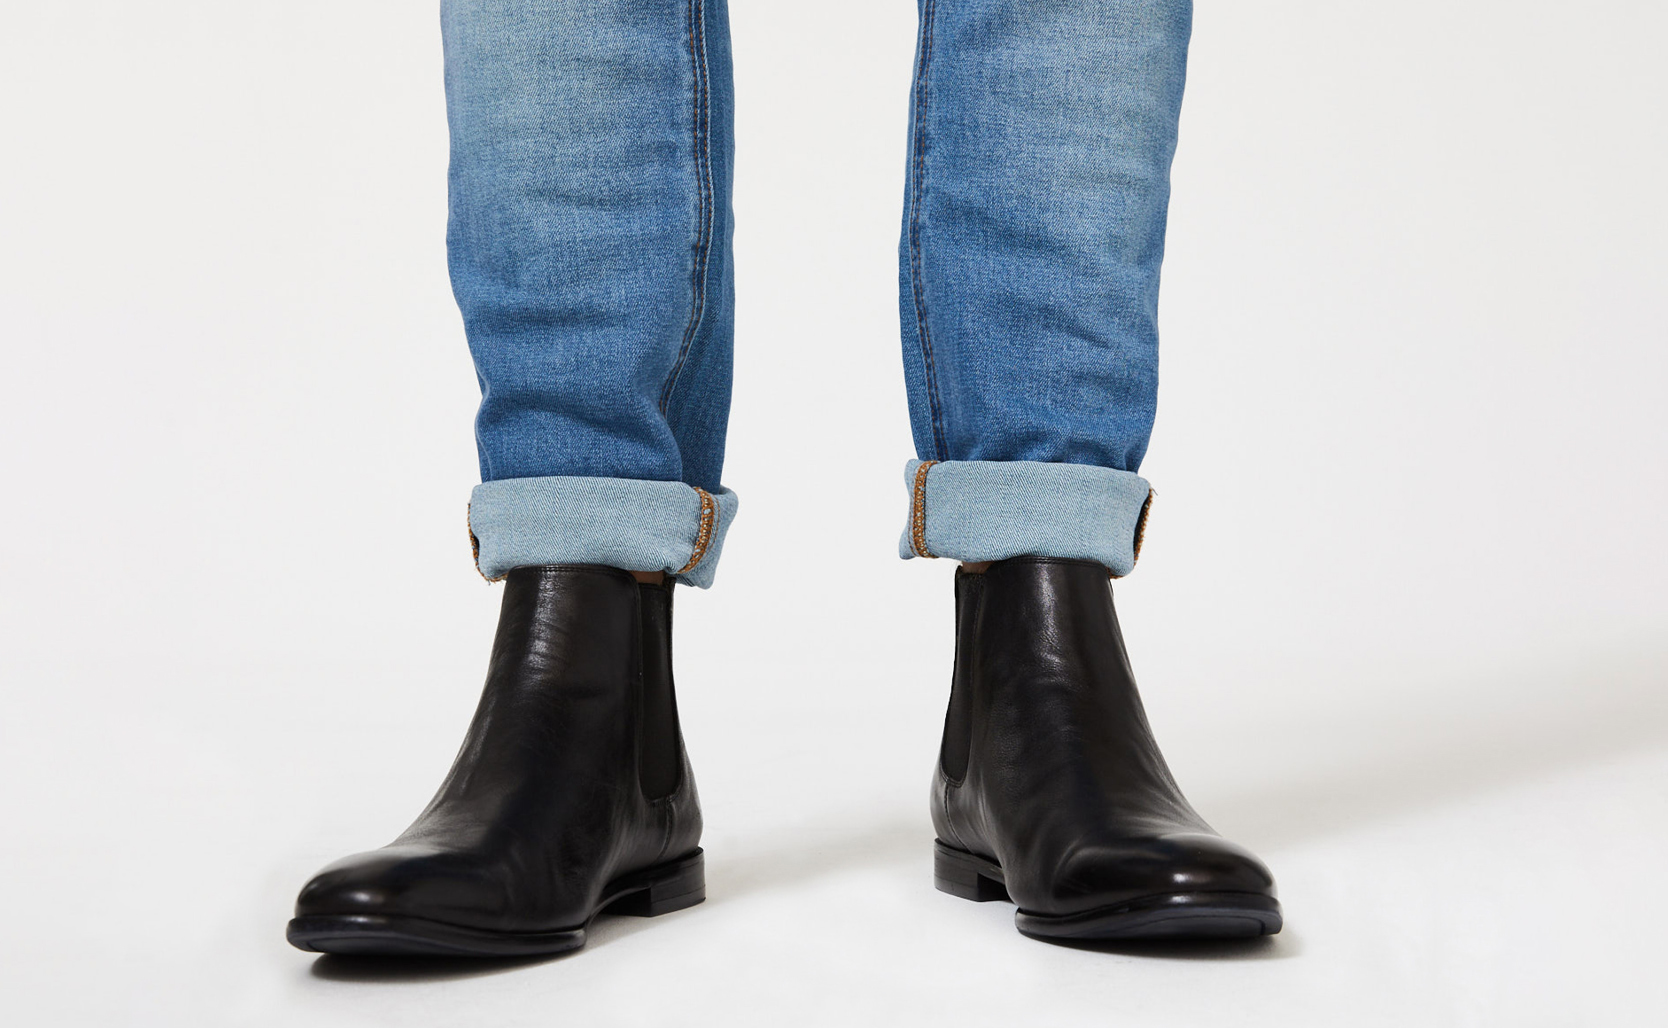 Cuffed jeans with Chelsea boots